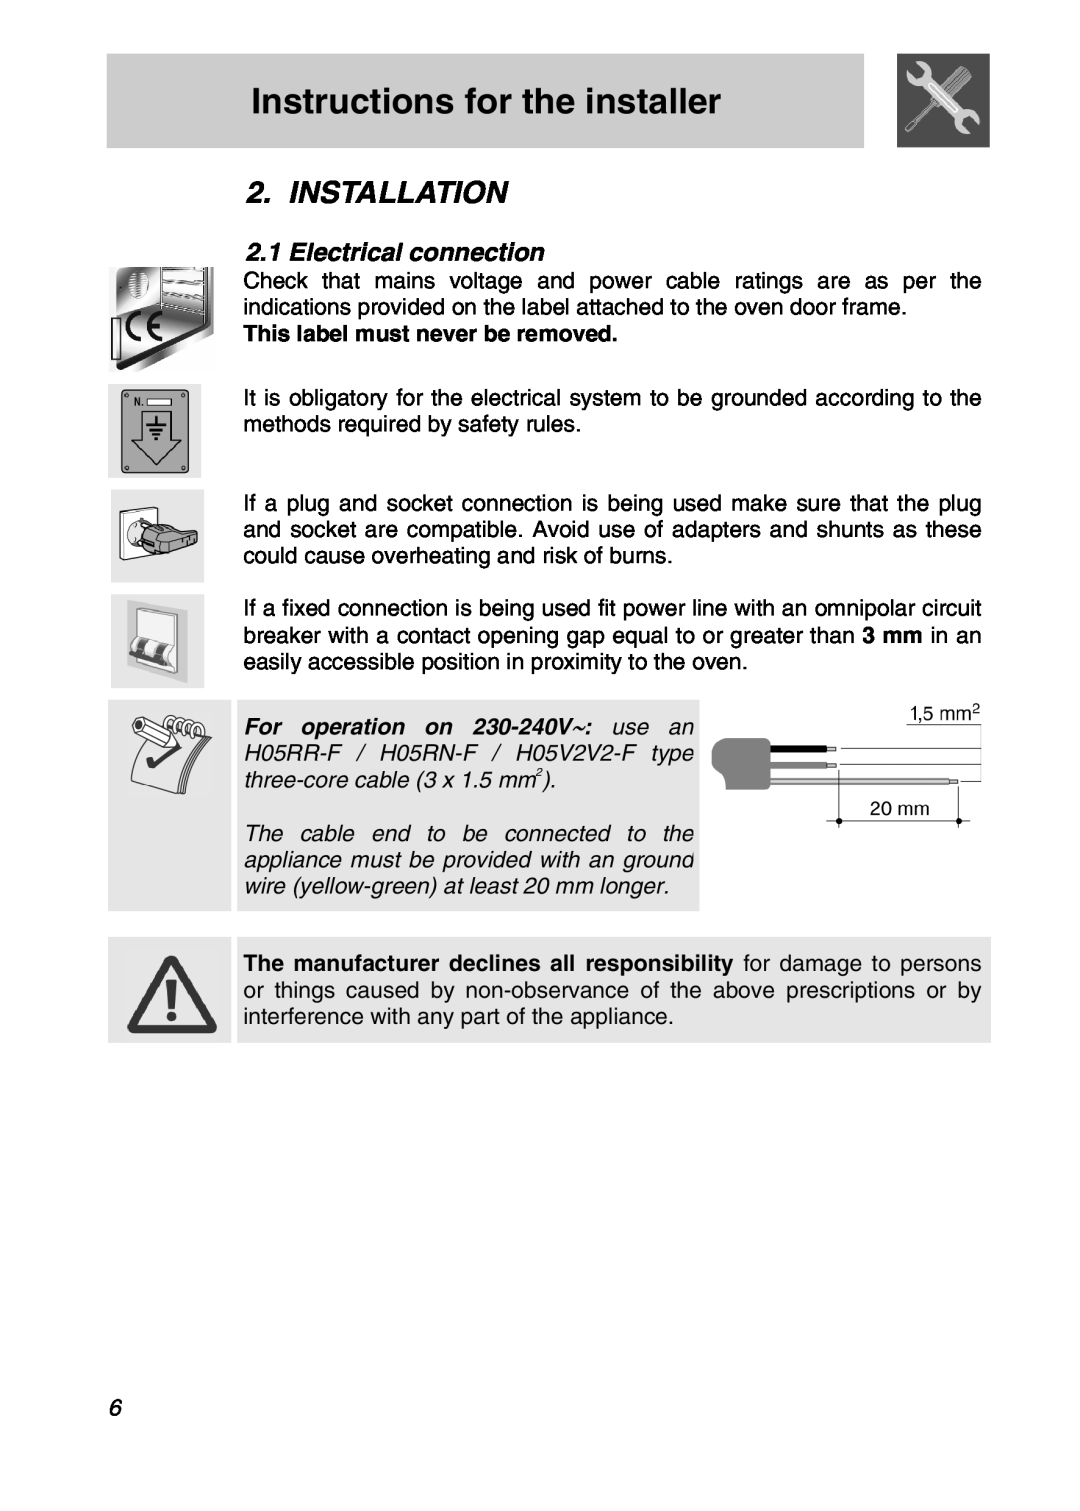 Smeg SA301X manual Instructions for the installer, Installation, Electrical connection, This label must never be removed 